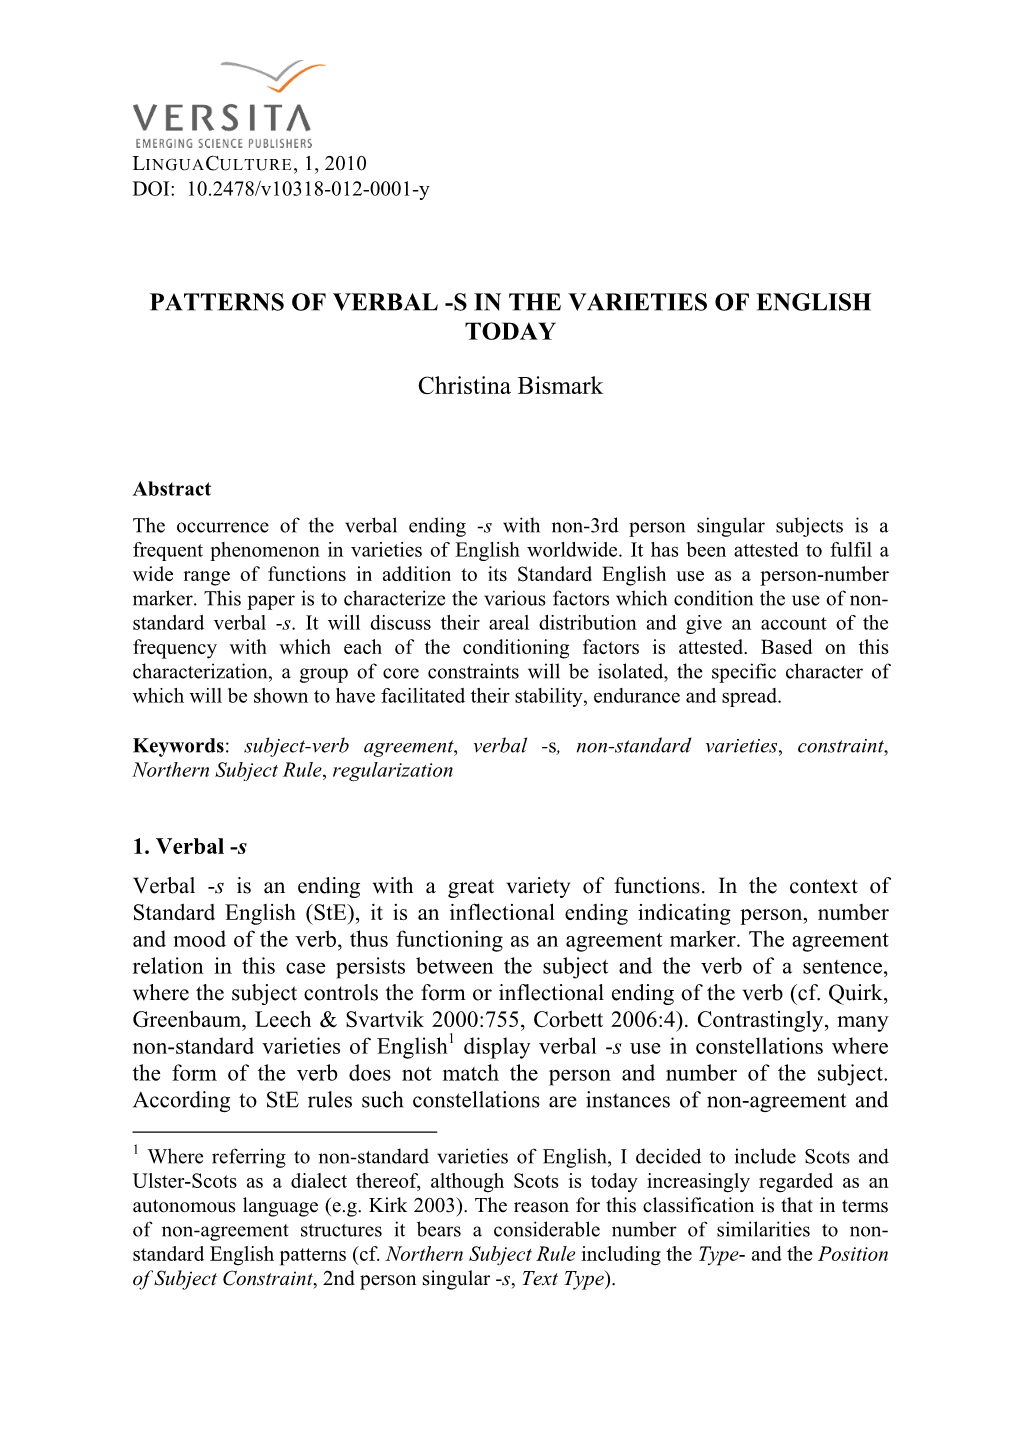 Patterns of Verbal -S in the Varieties of English Today